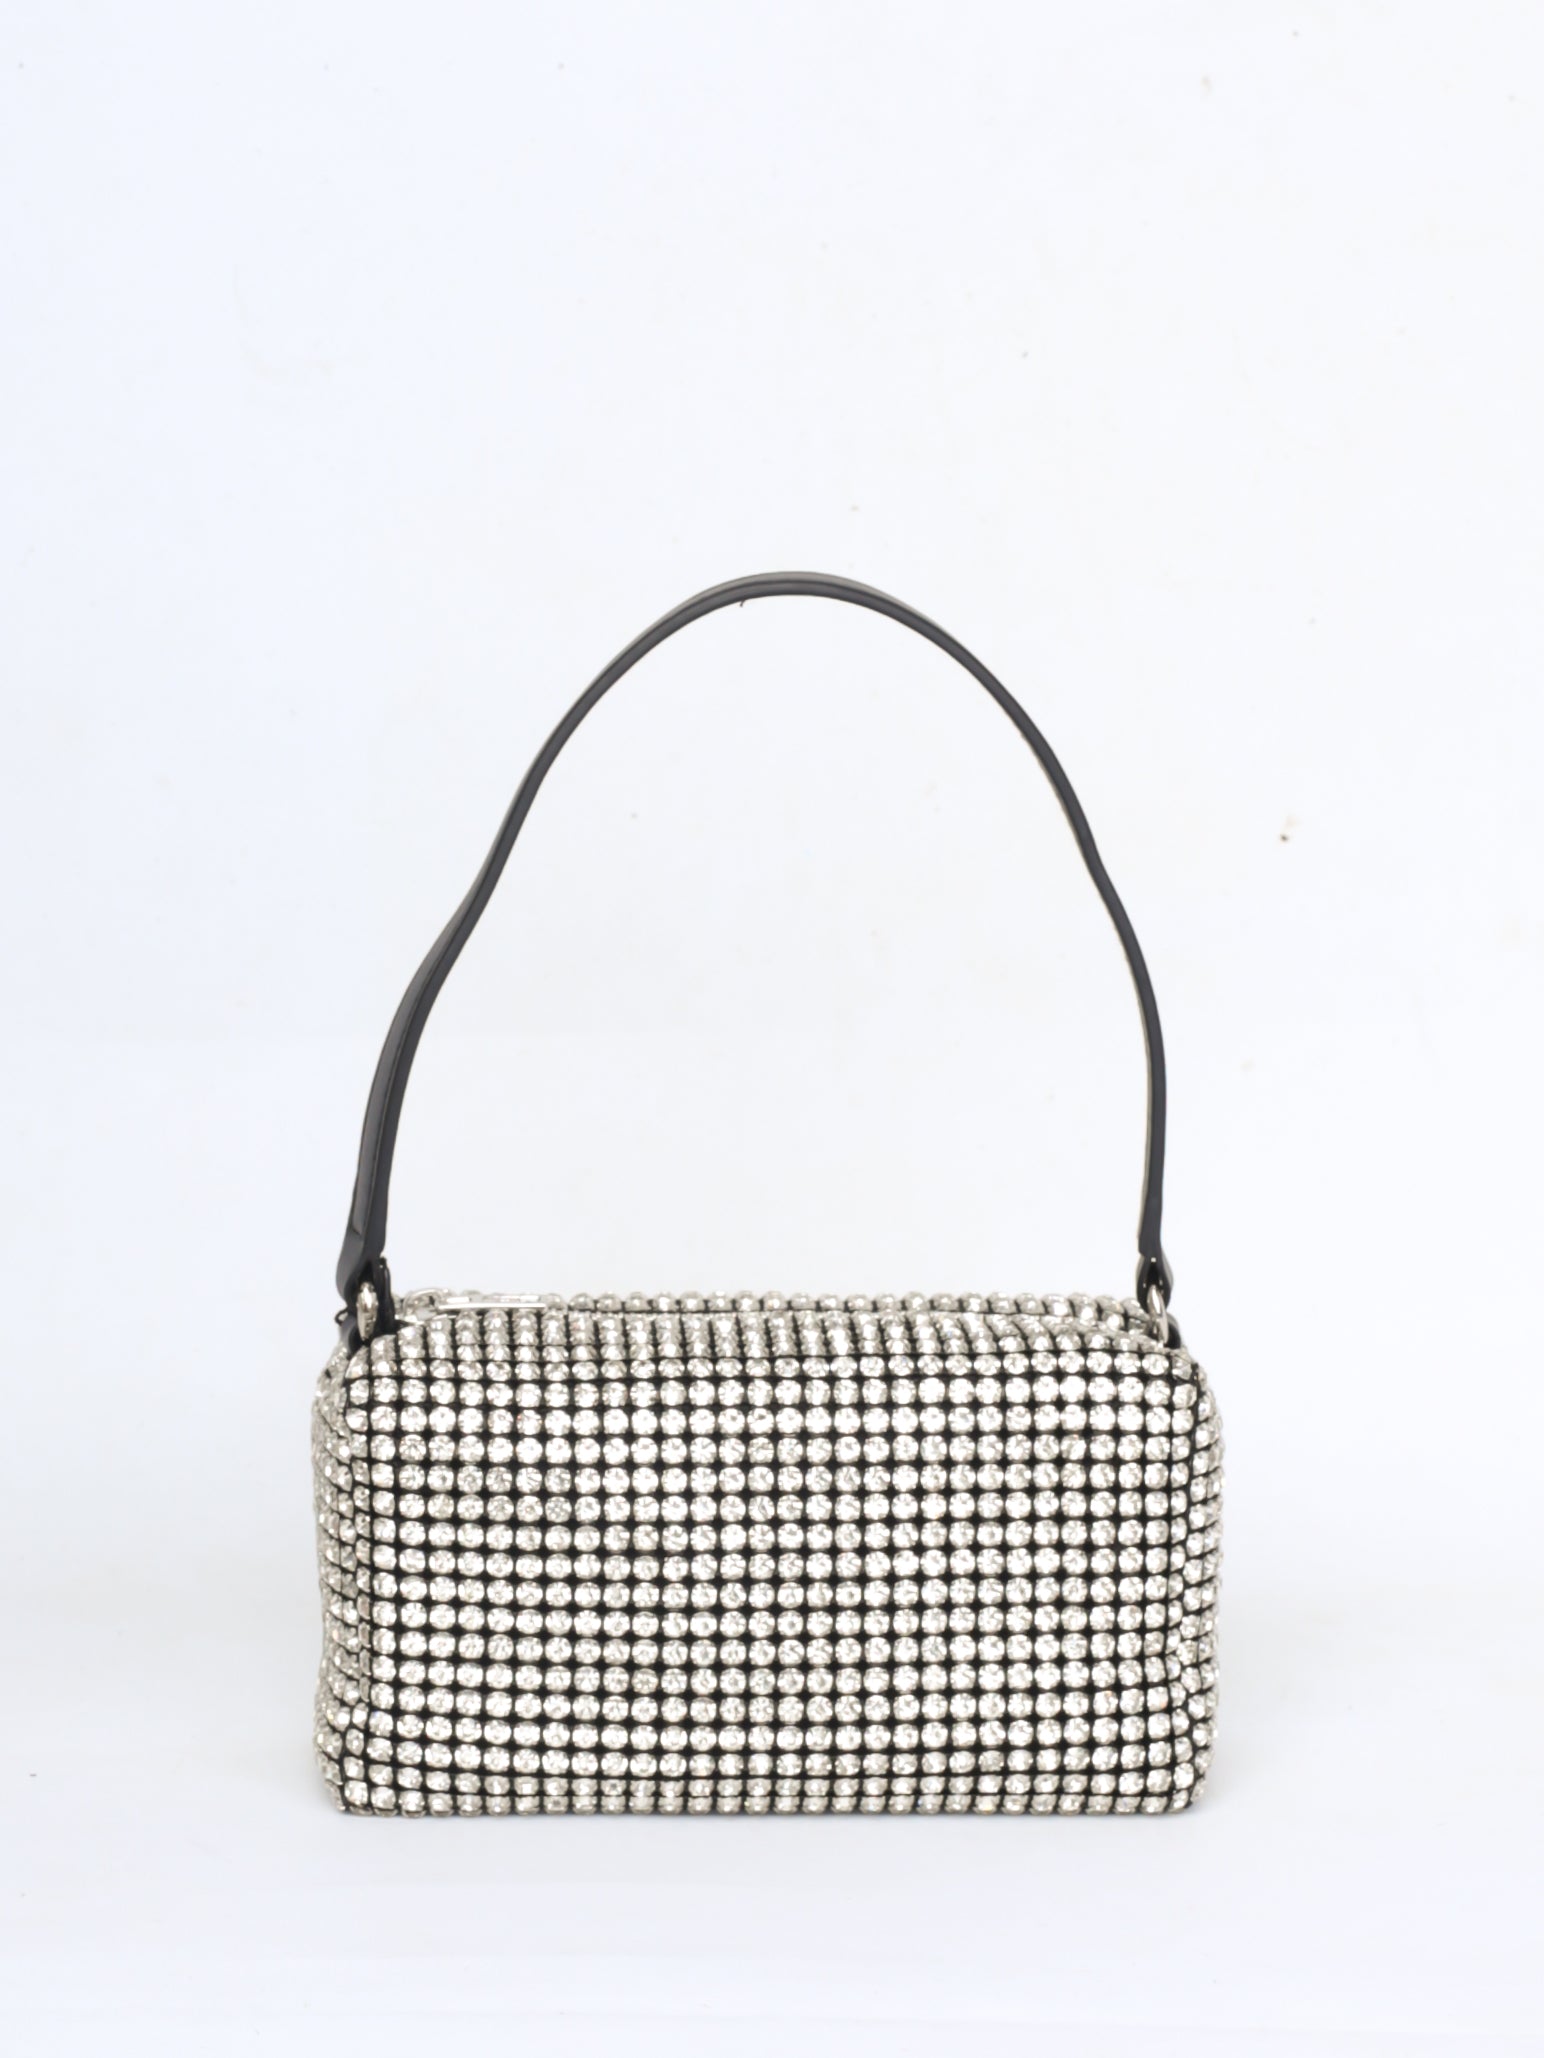 Bling bag with handle and chain